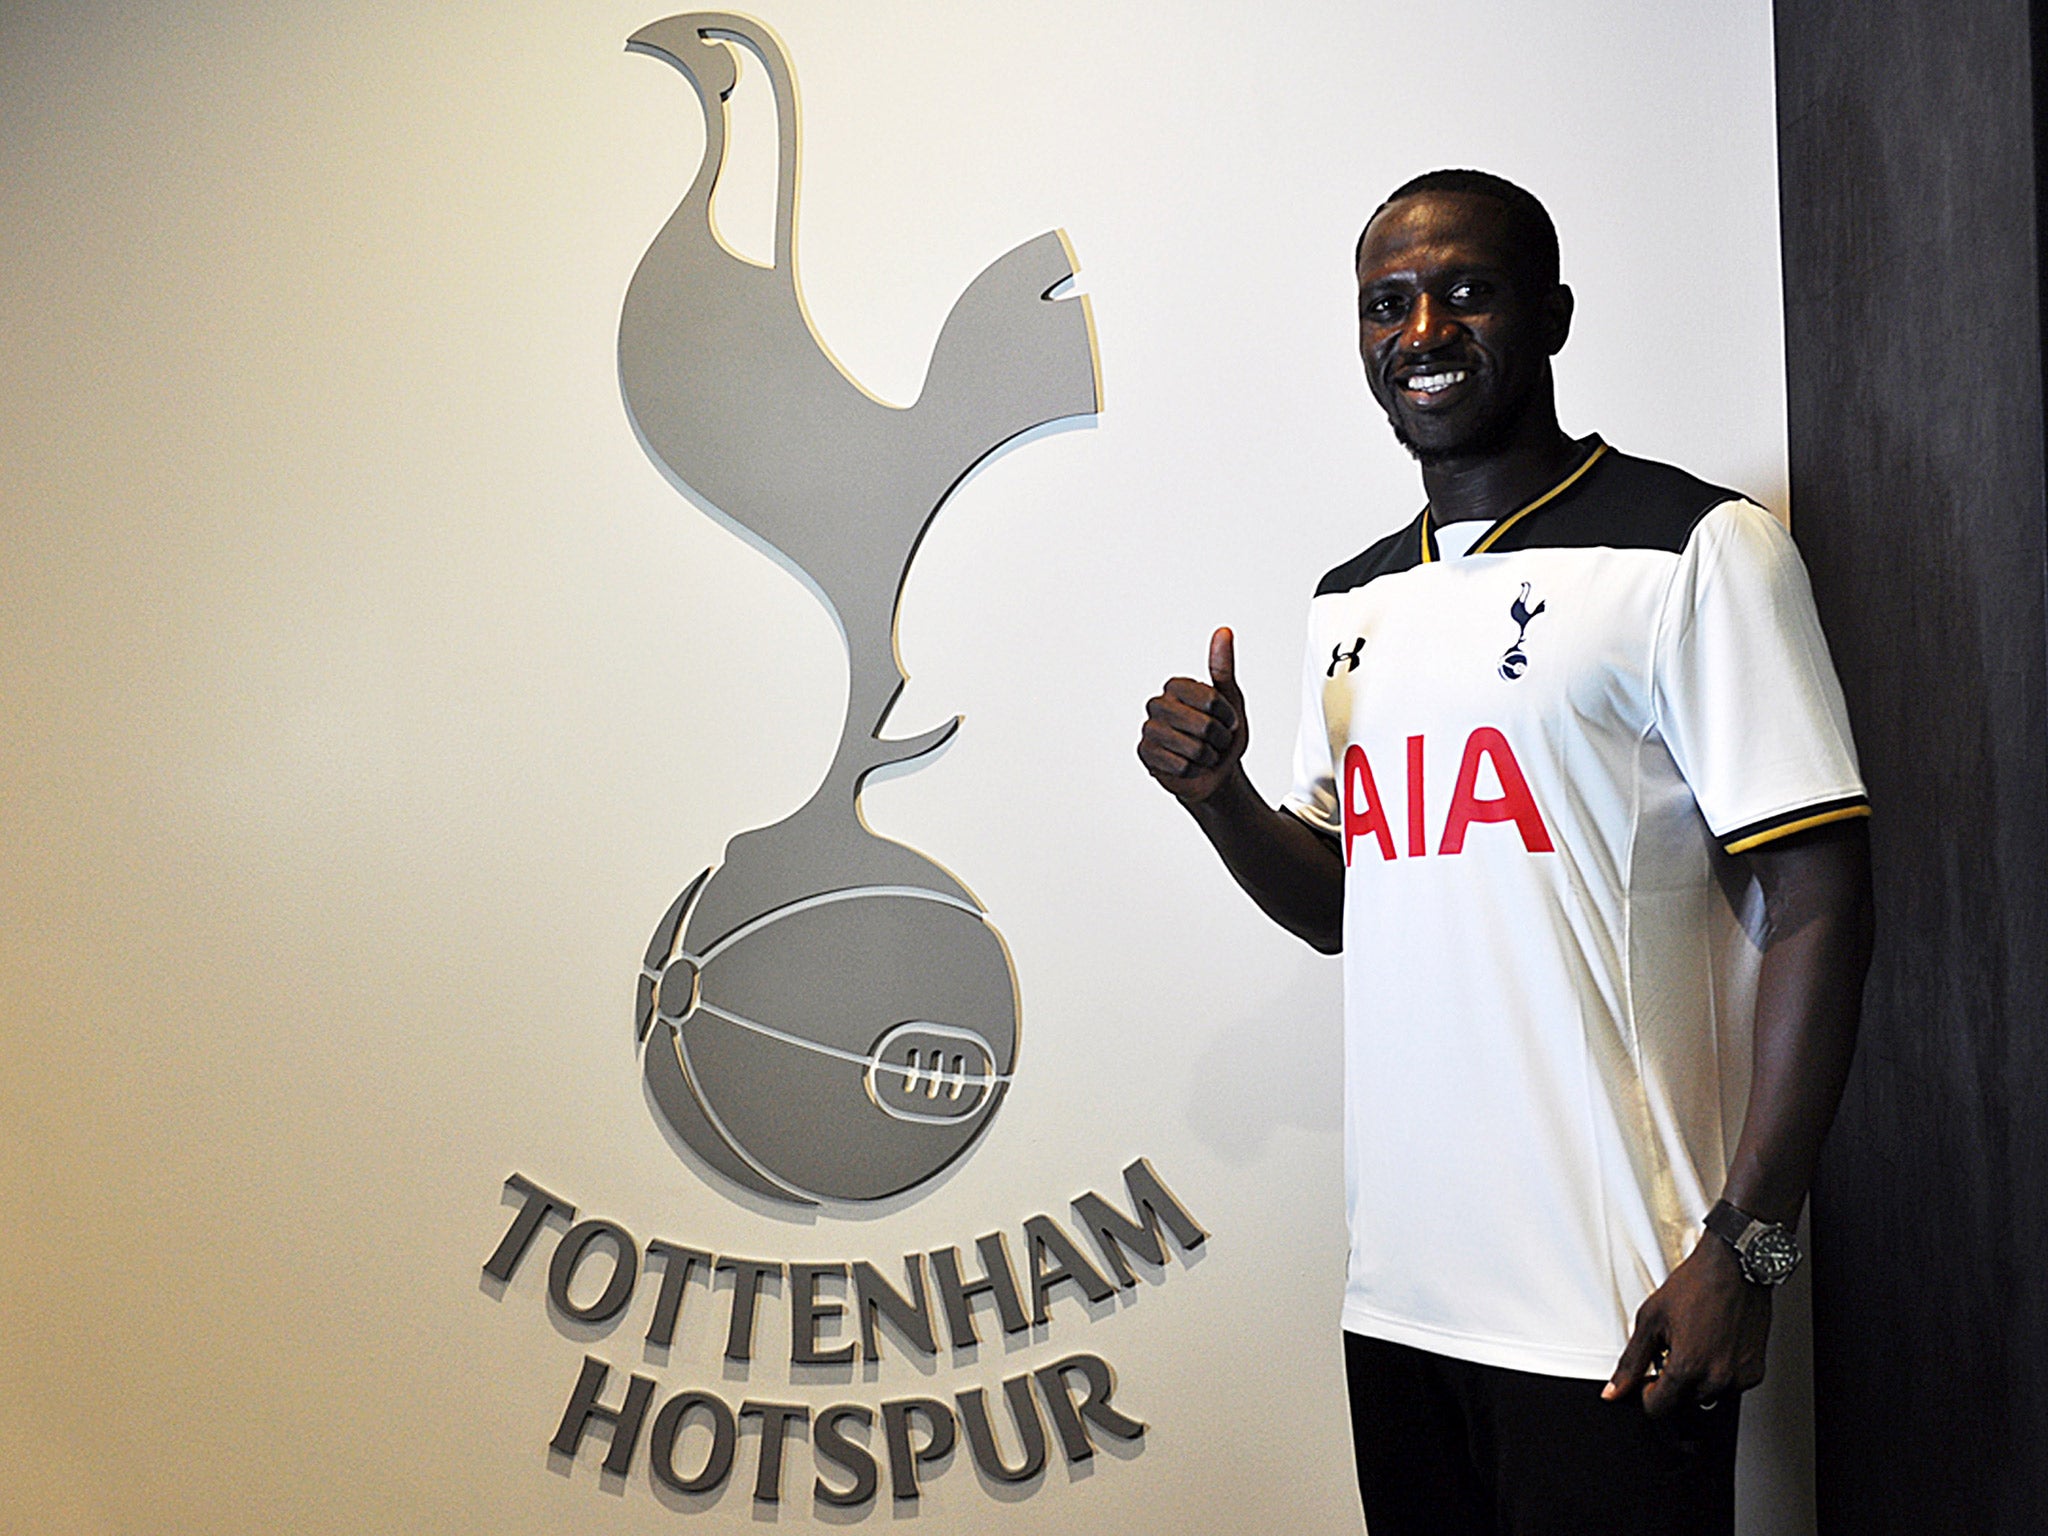 Moussa Sissoko completed a £30m move from Newcastle to Tottenham on deadline day